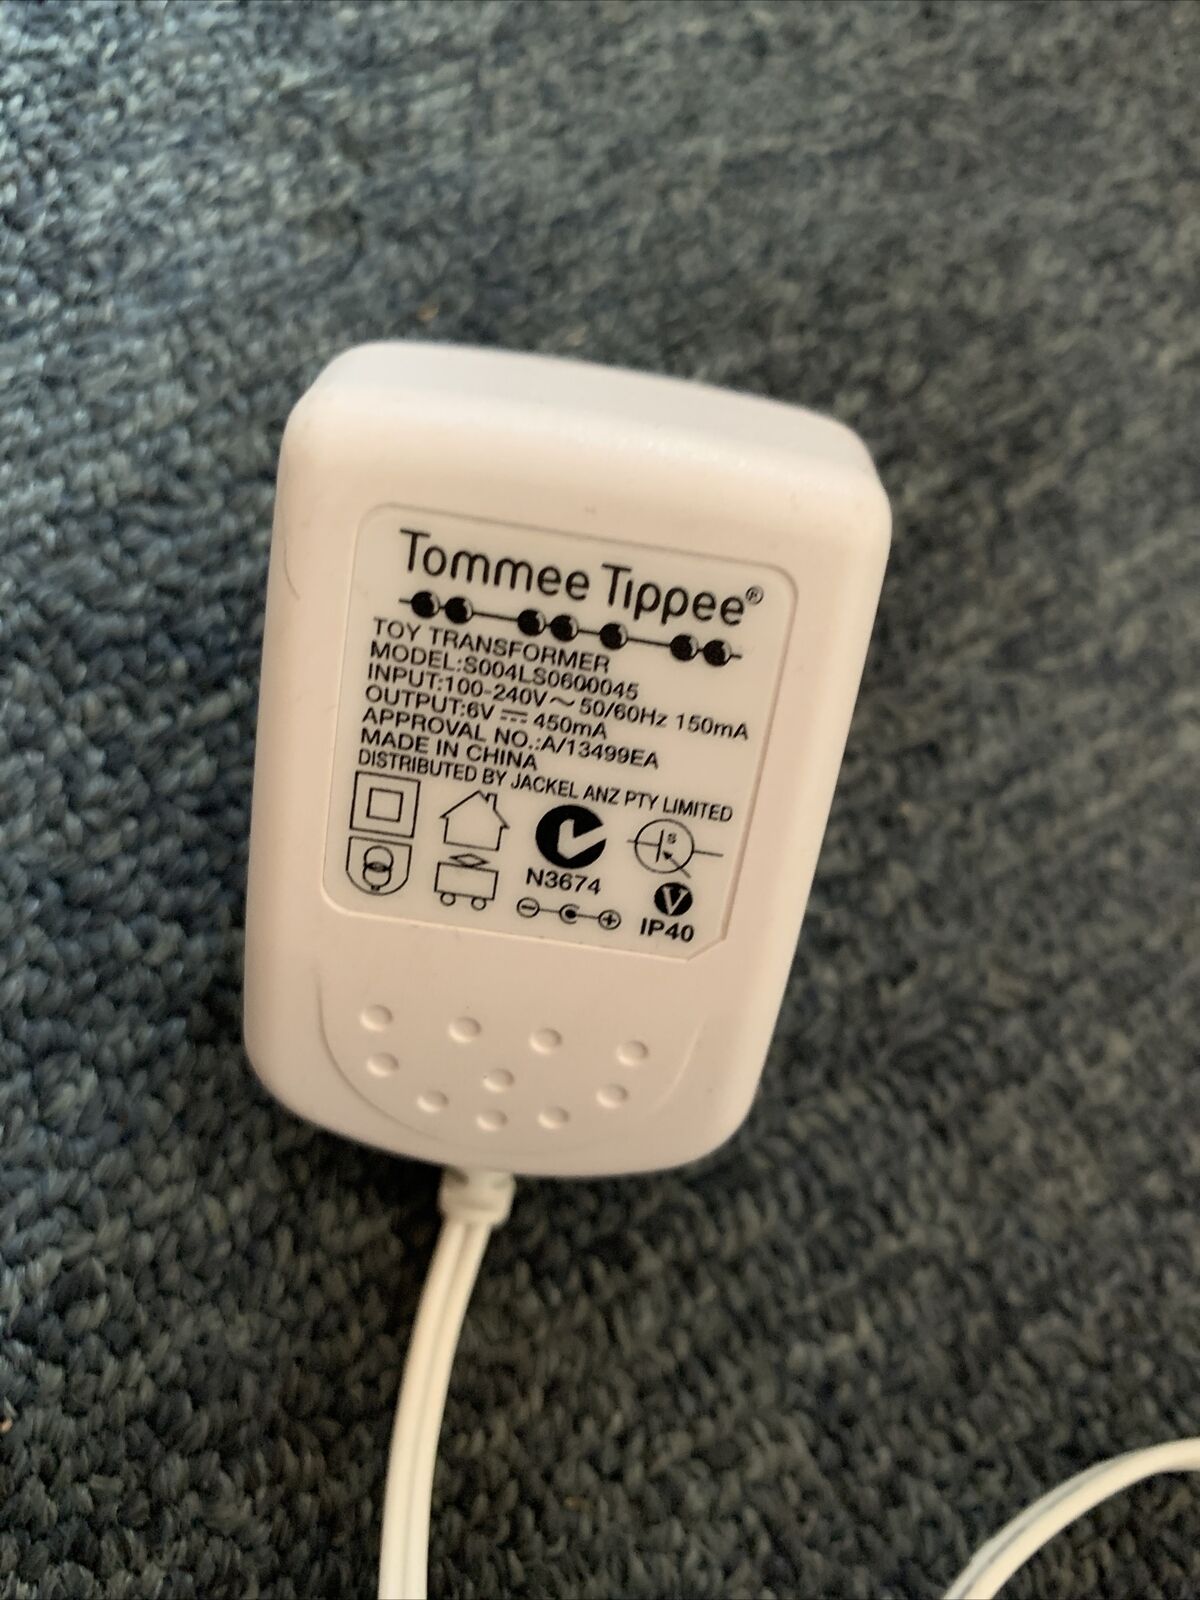 Tommee Tippee Toy Transformer S004LS0600045 AC Adapter 6V 450mA Colour: White C